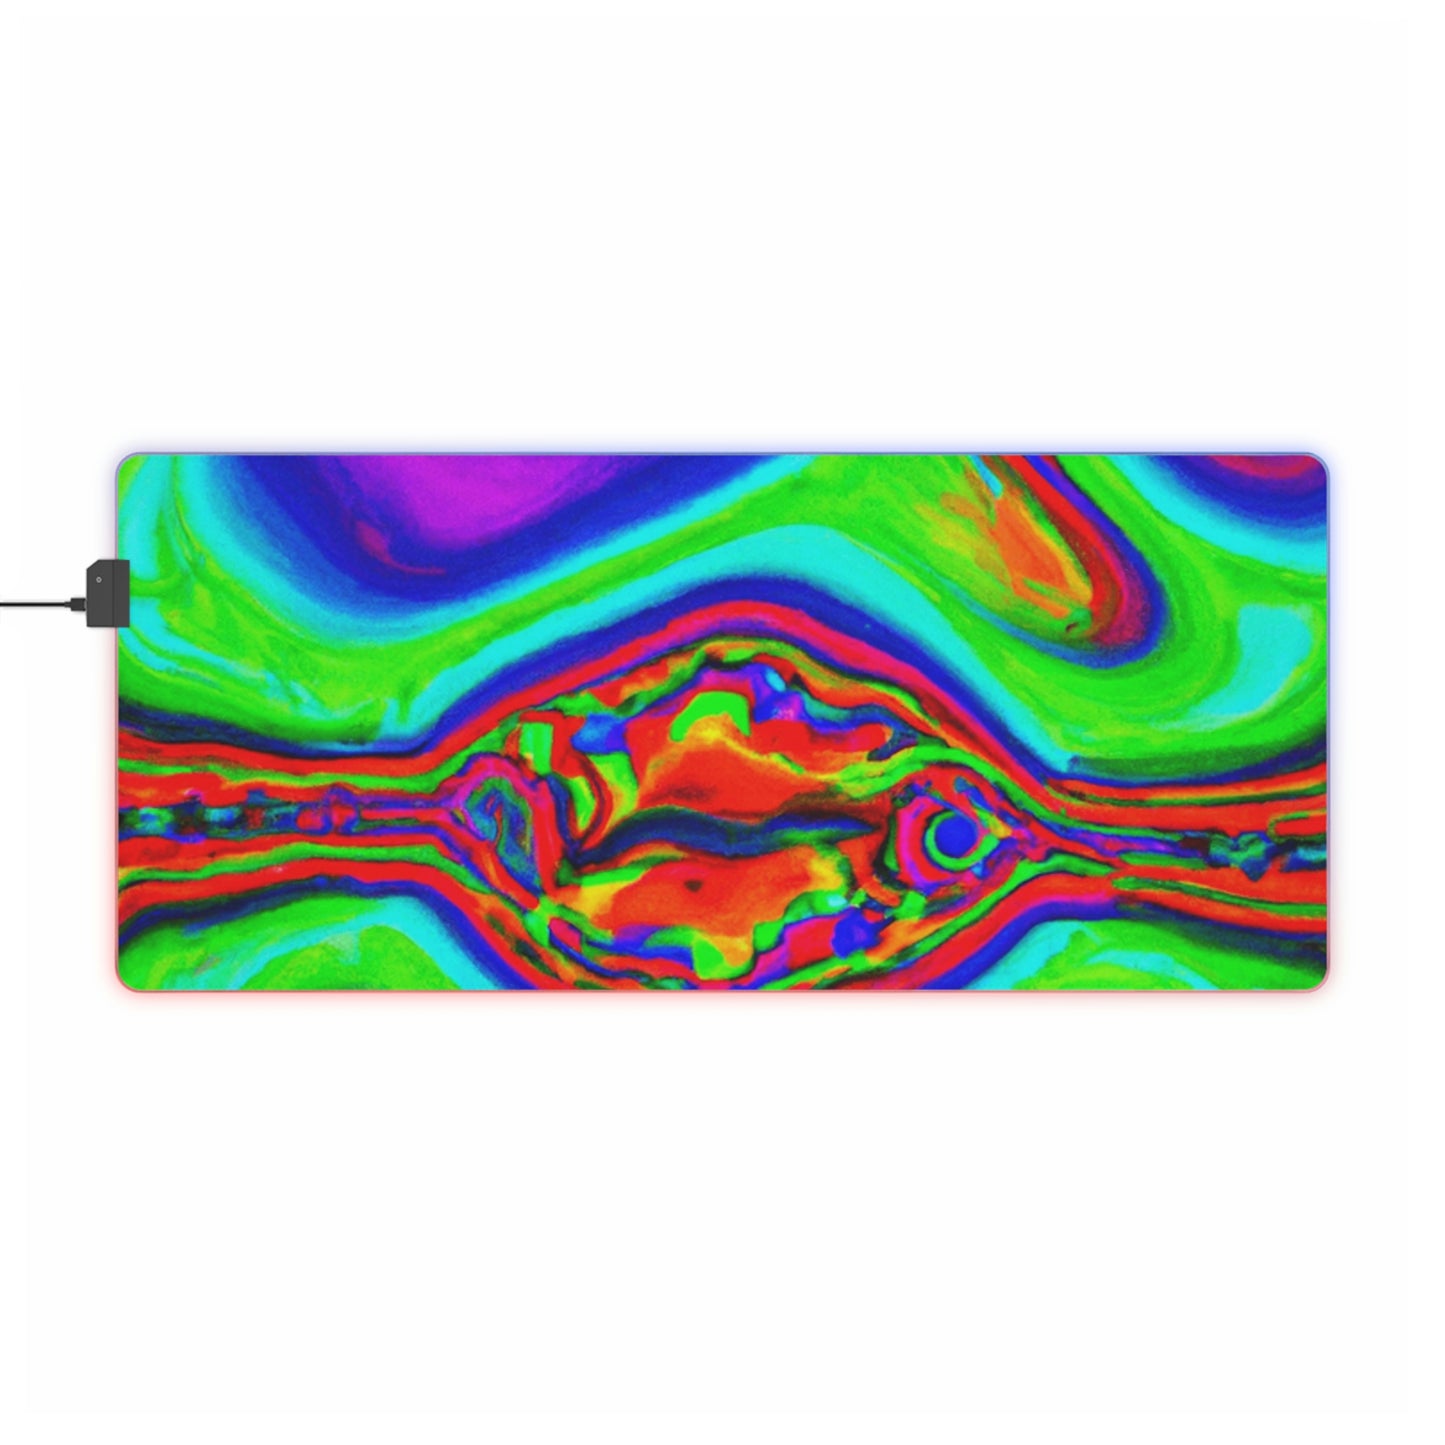 Archie Astroblast - Psychedelic Trippy LED Light Up Gaming Mouse Pad